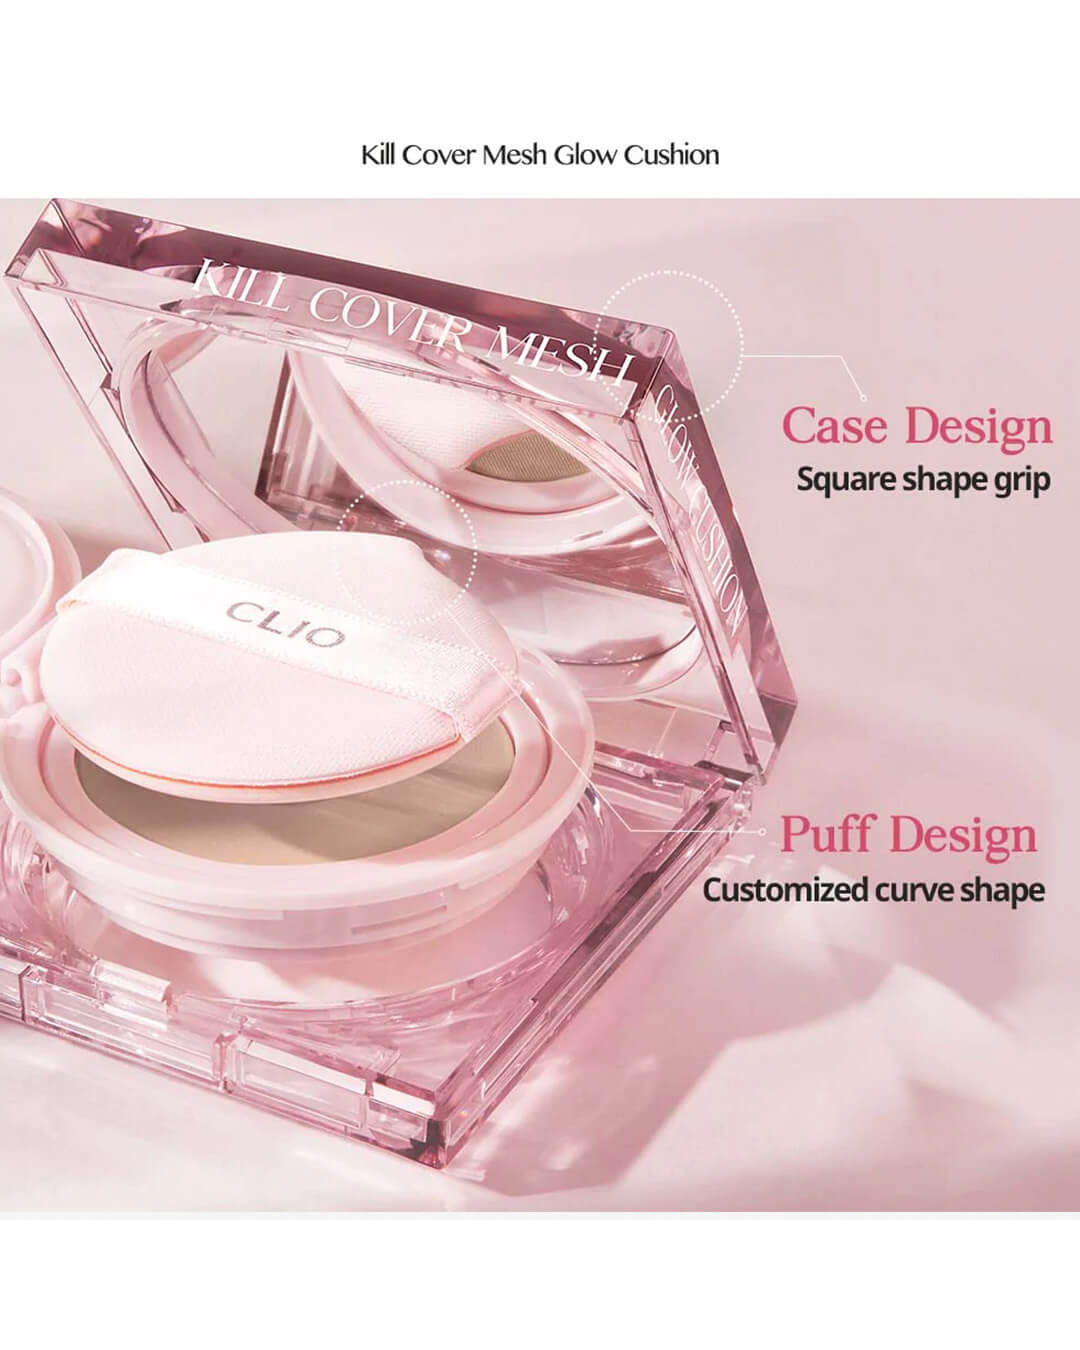  LOVB LOVB Cushion Foundation Makeup for Natural Looking Glow, Long-Lasting Buildable Coverage, Lightweight and Moisturizing Korean  Cushion Makeup